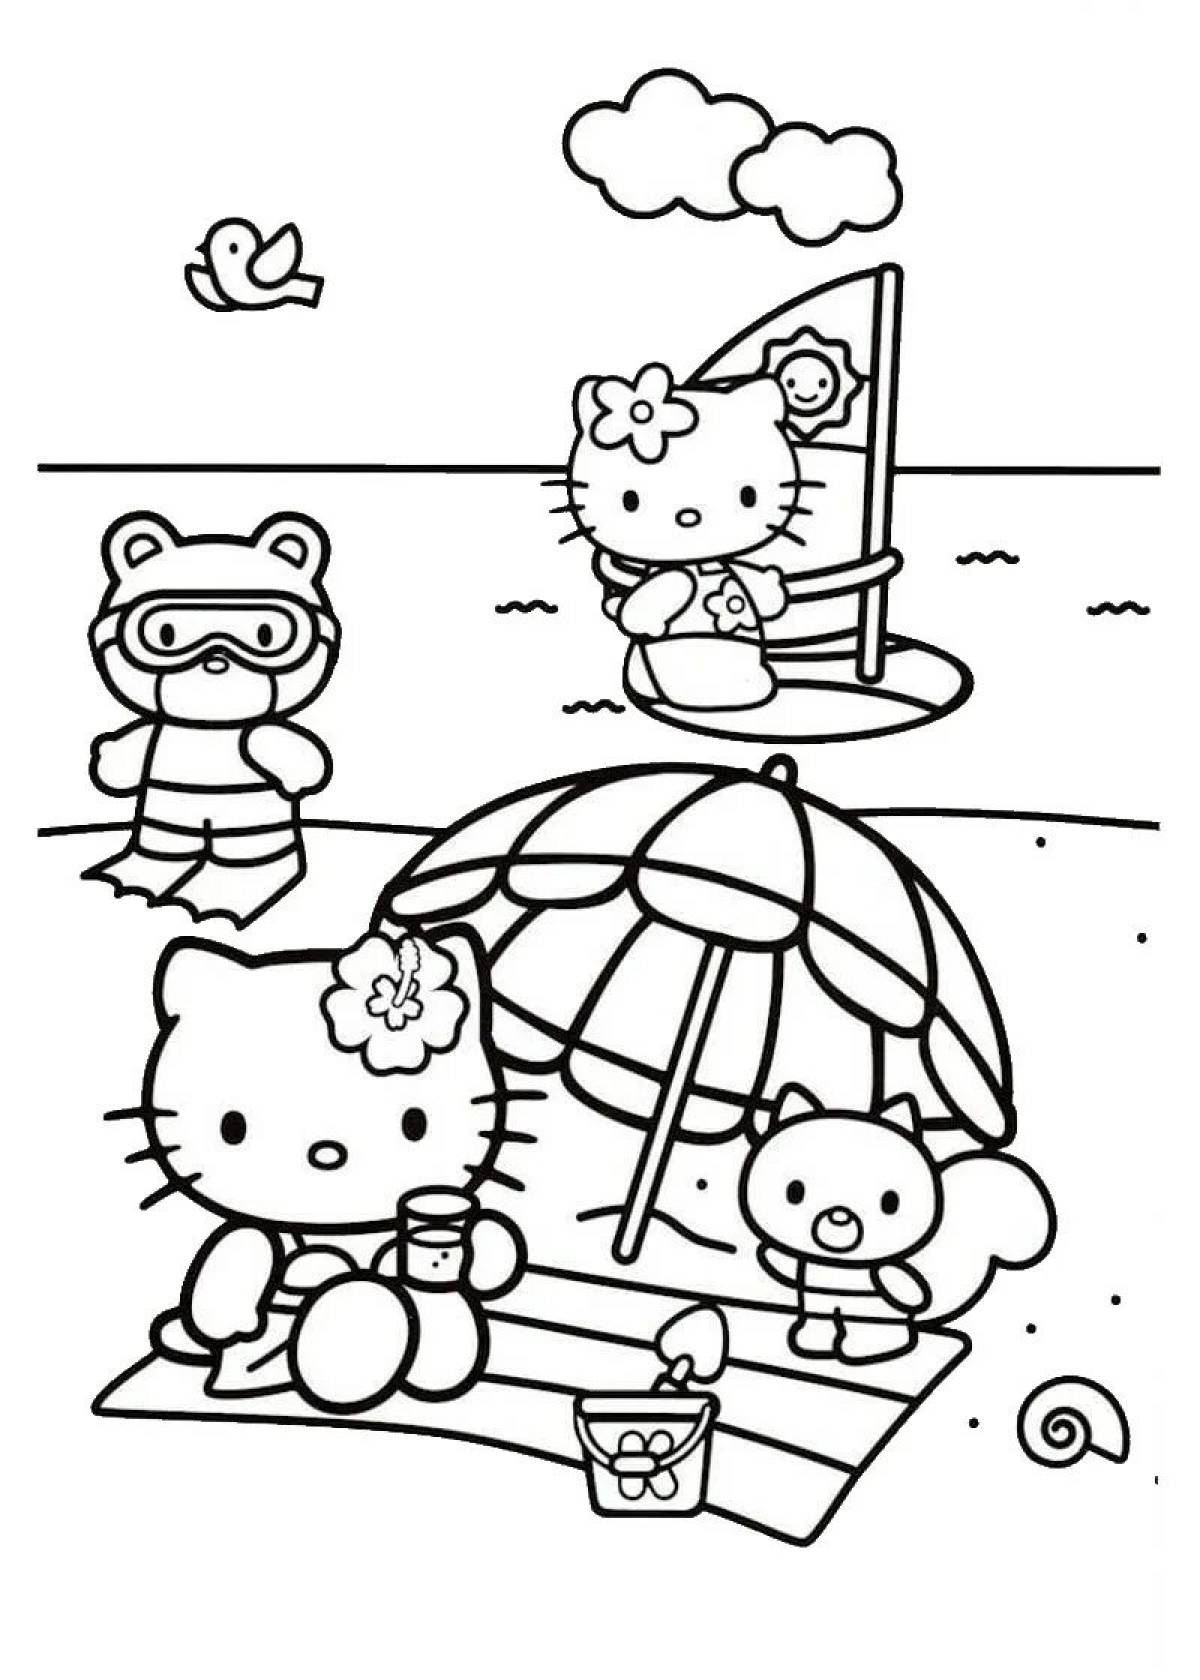 Hello kitty and her friends #4